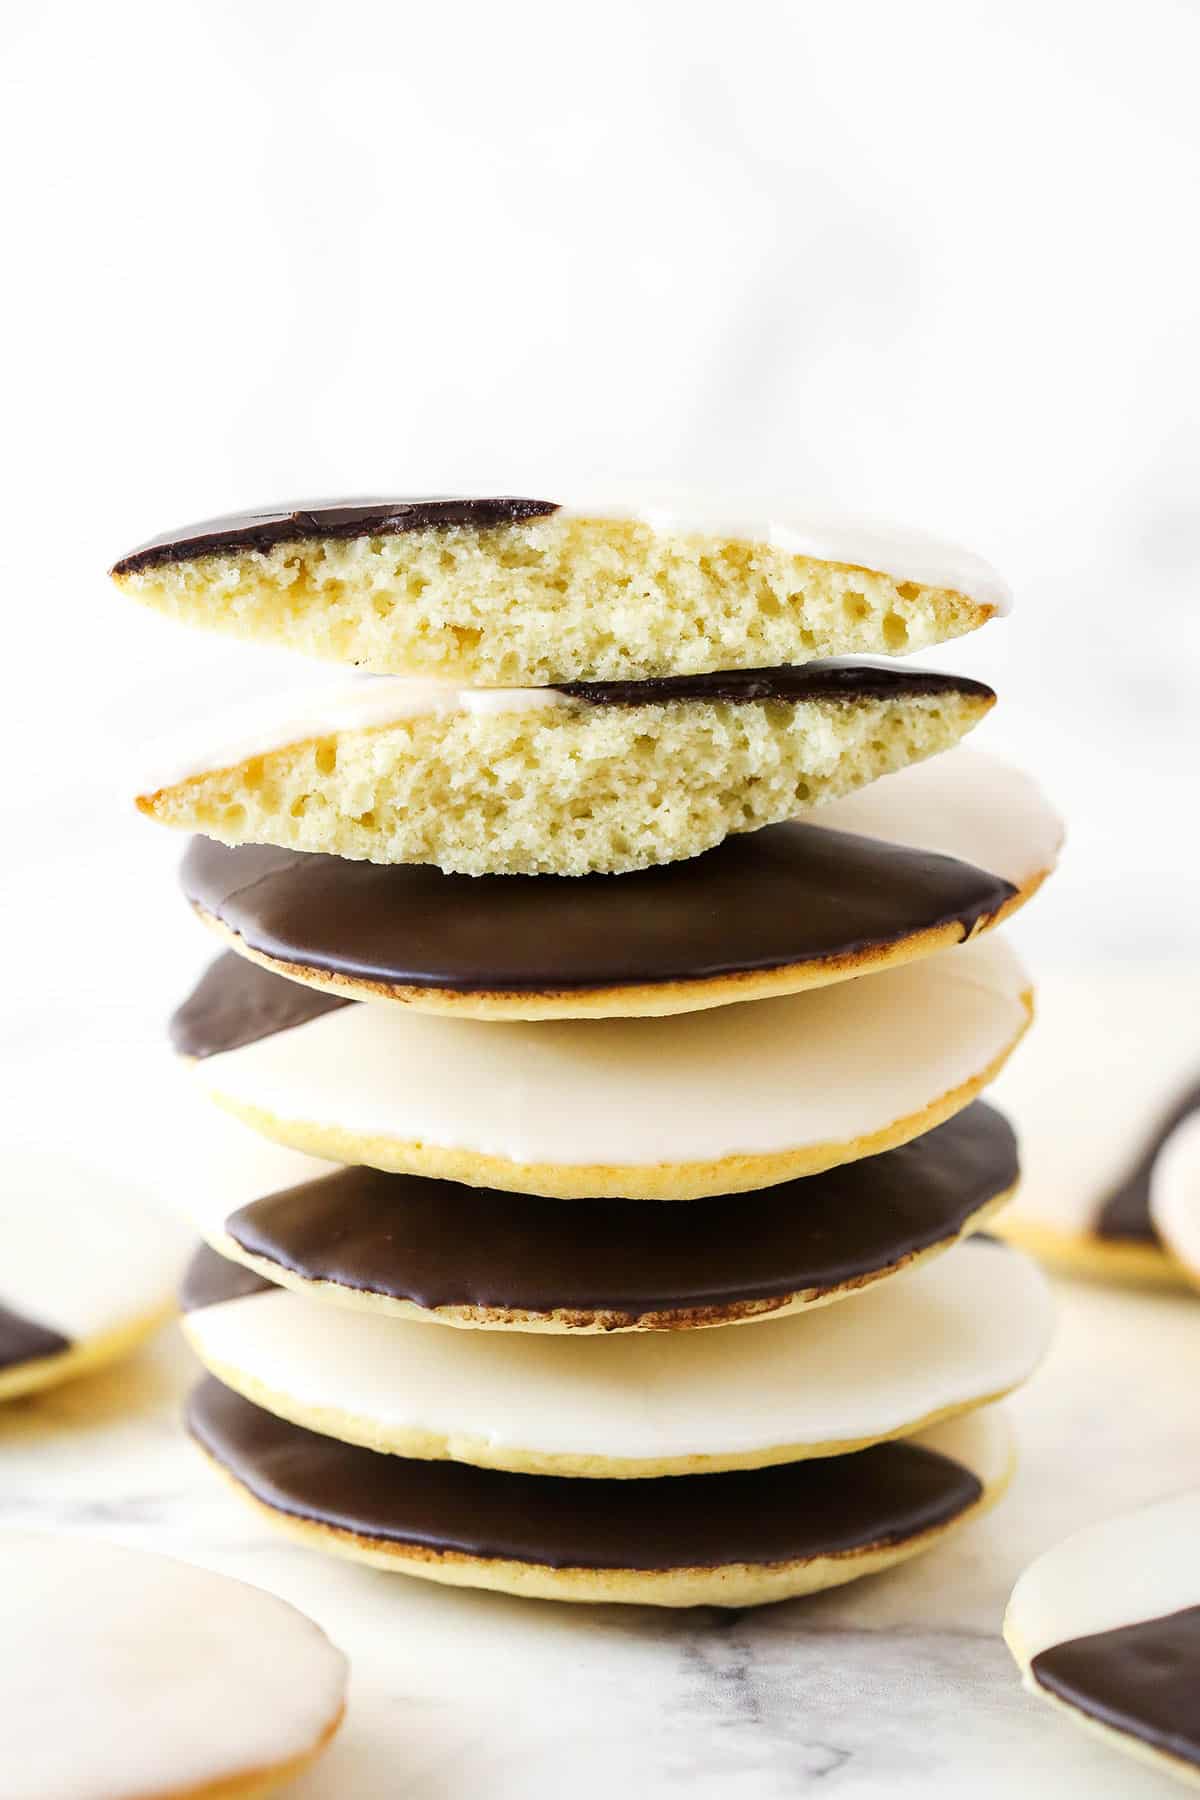 A stack of black and white cookies. The top cookie is broken in half.